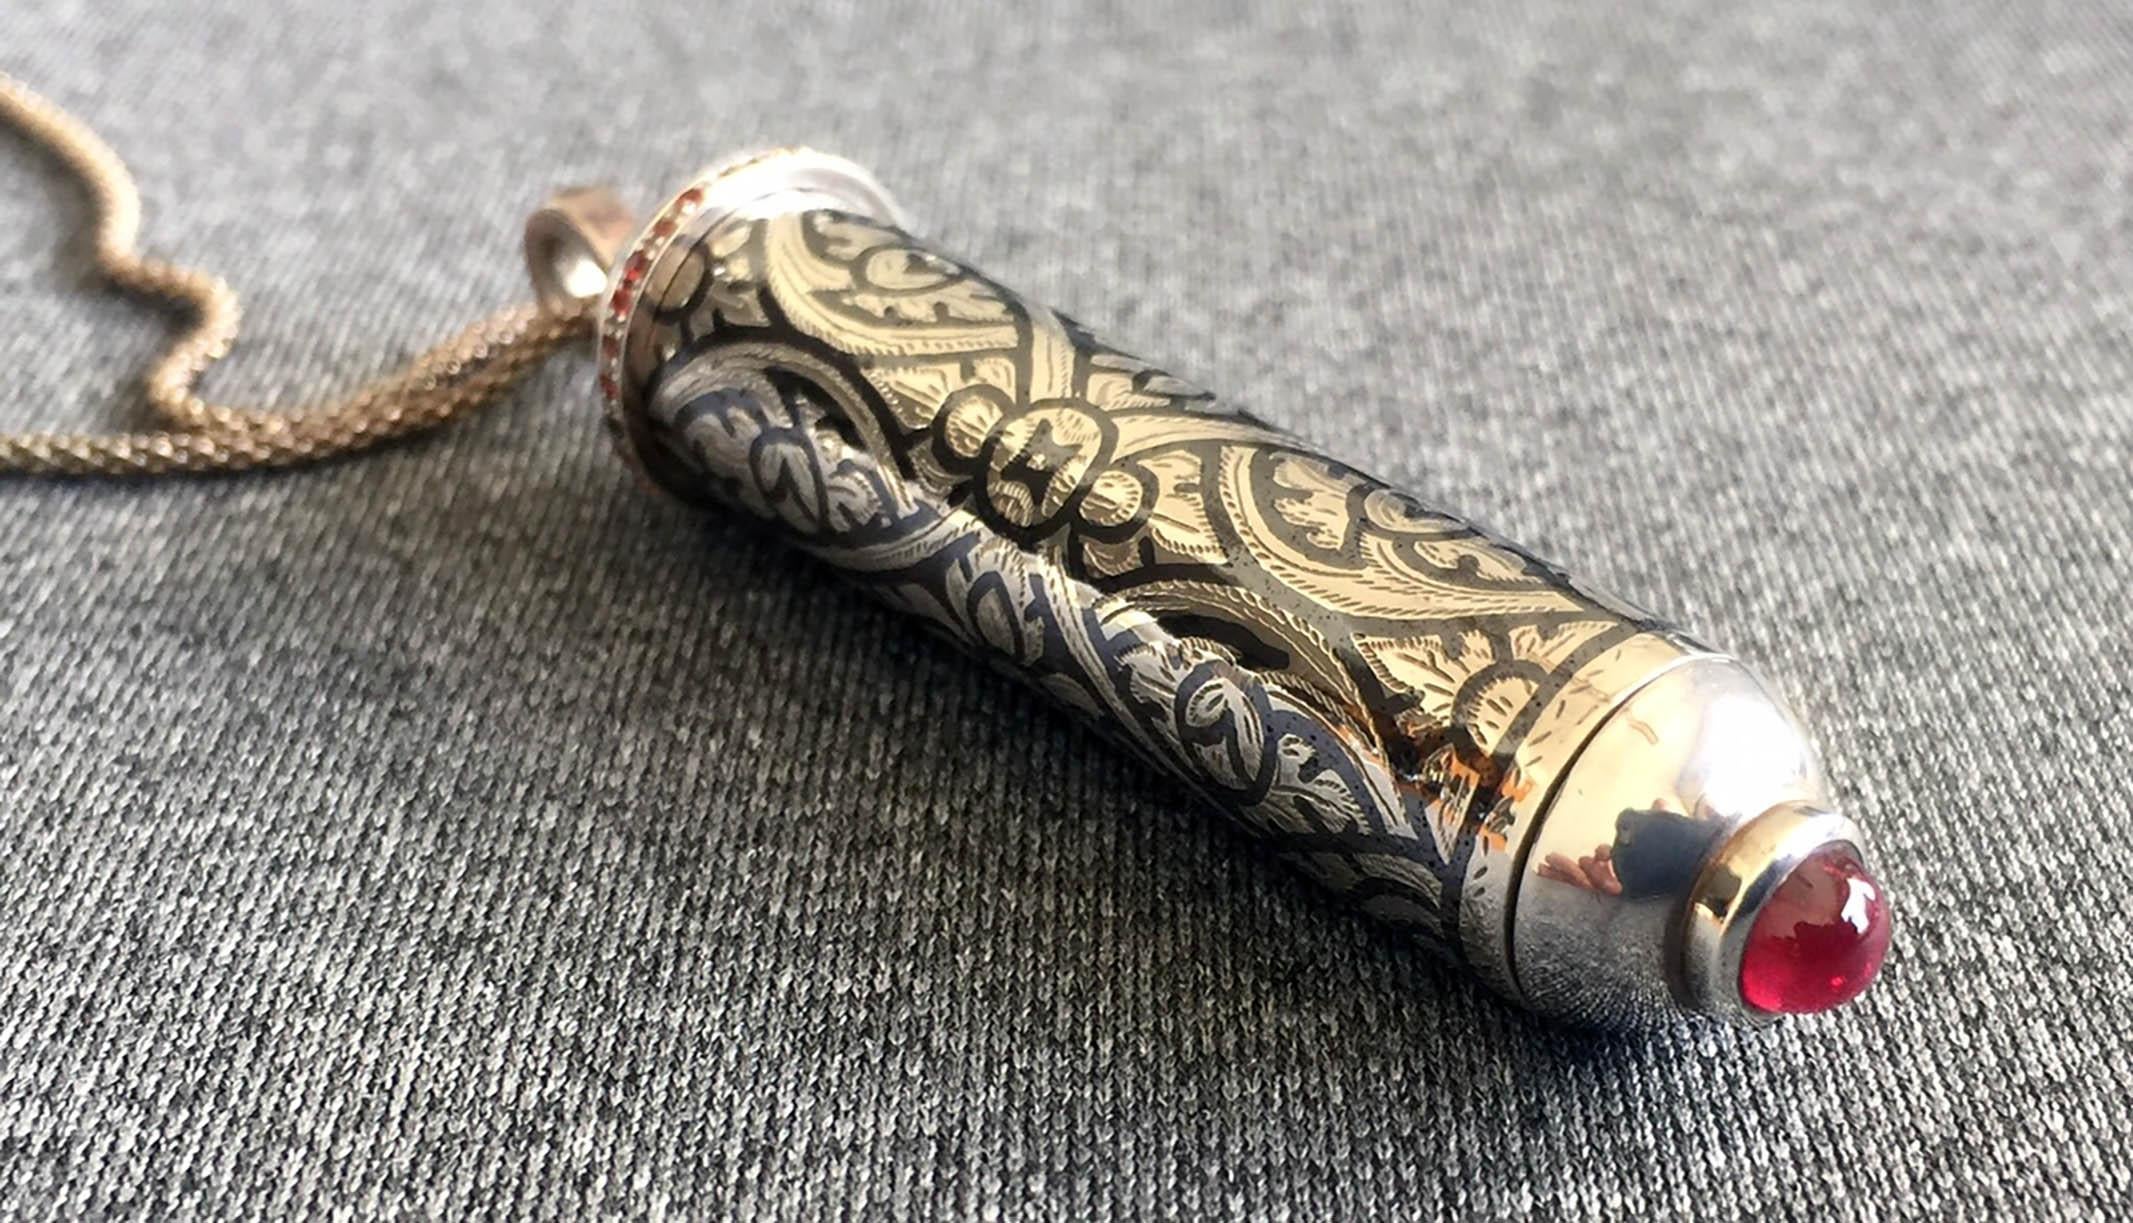 This Lanna Style Pendant was created in a traditional Thai craft style called Nielloware. Using an amalgam of Tin Oxide inlayed on a Silver setting displays a beautiful design contrast of Silver and dark Tin Oxide.  The Pendant is hollow with a